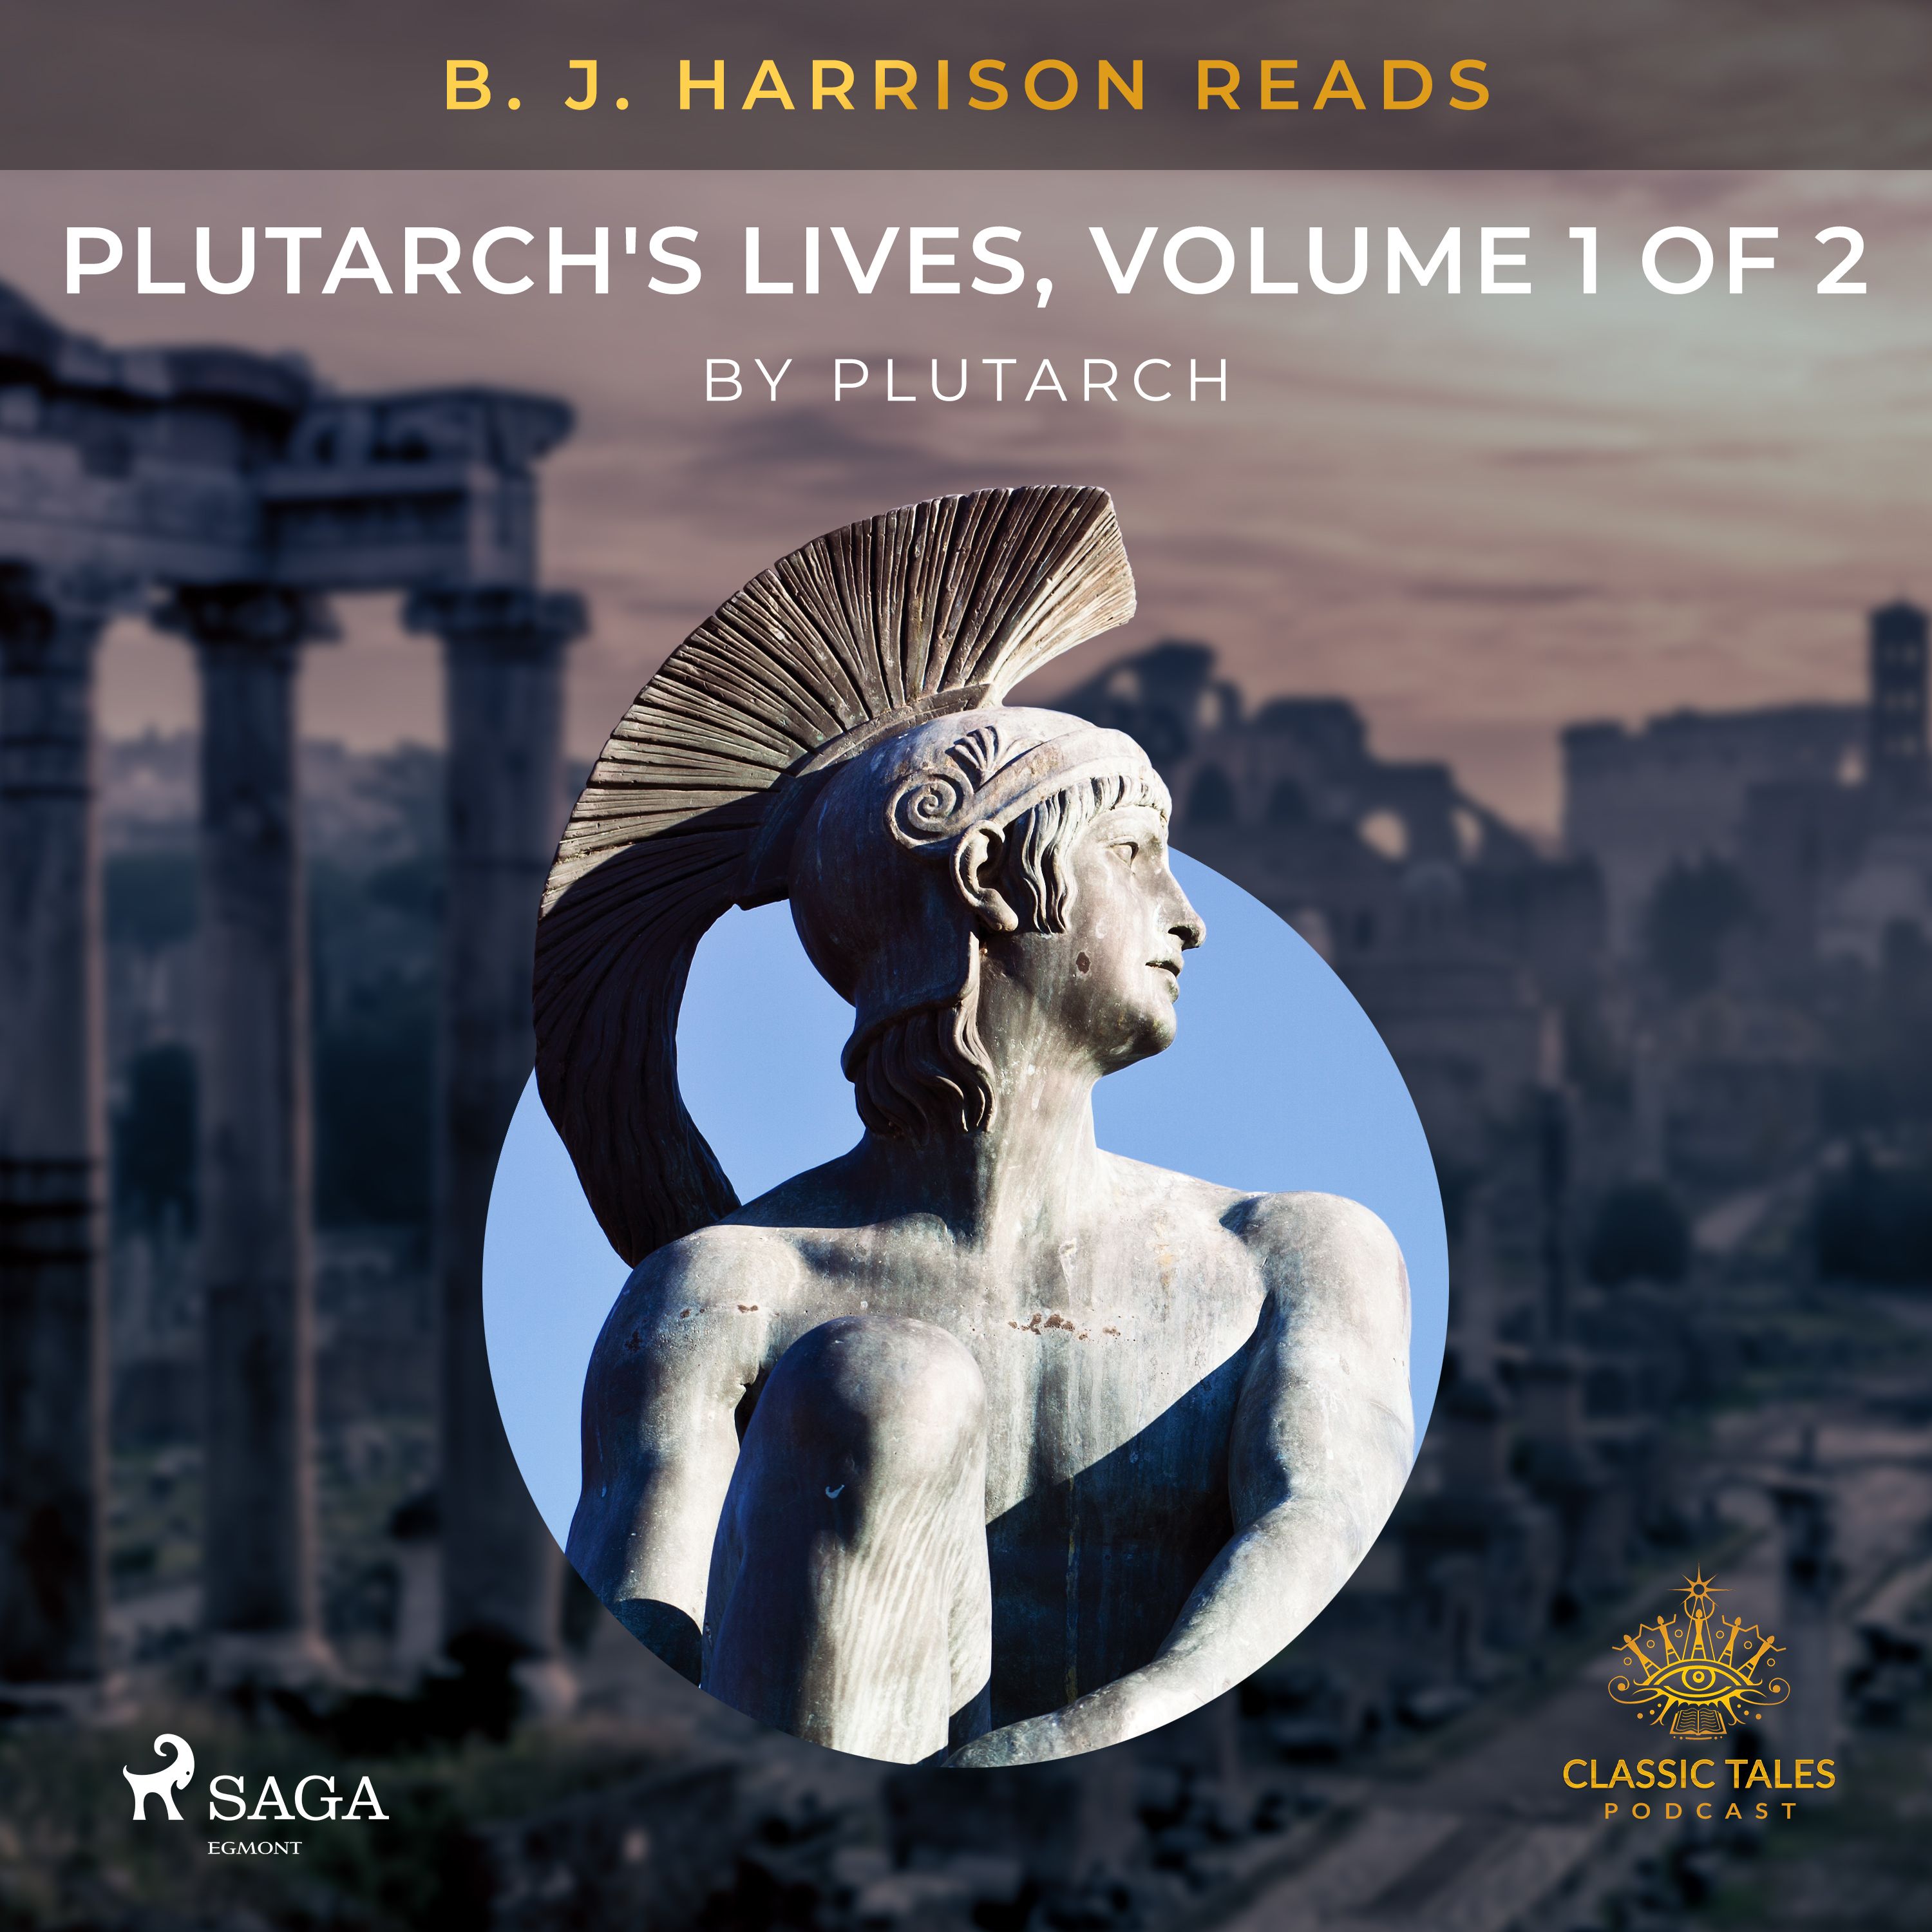 B. J. Harrison Reads Plutarch's Lives, Volume 1 of 2, audiobook by Plutarch